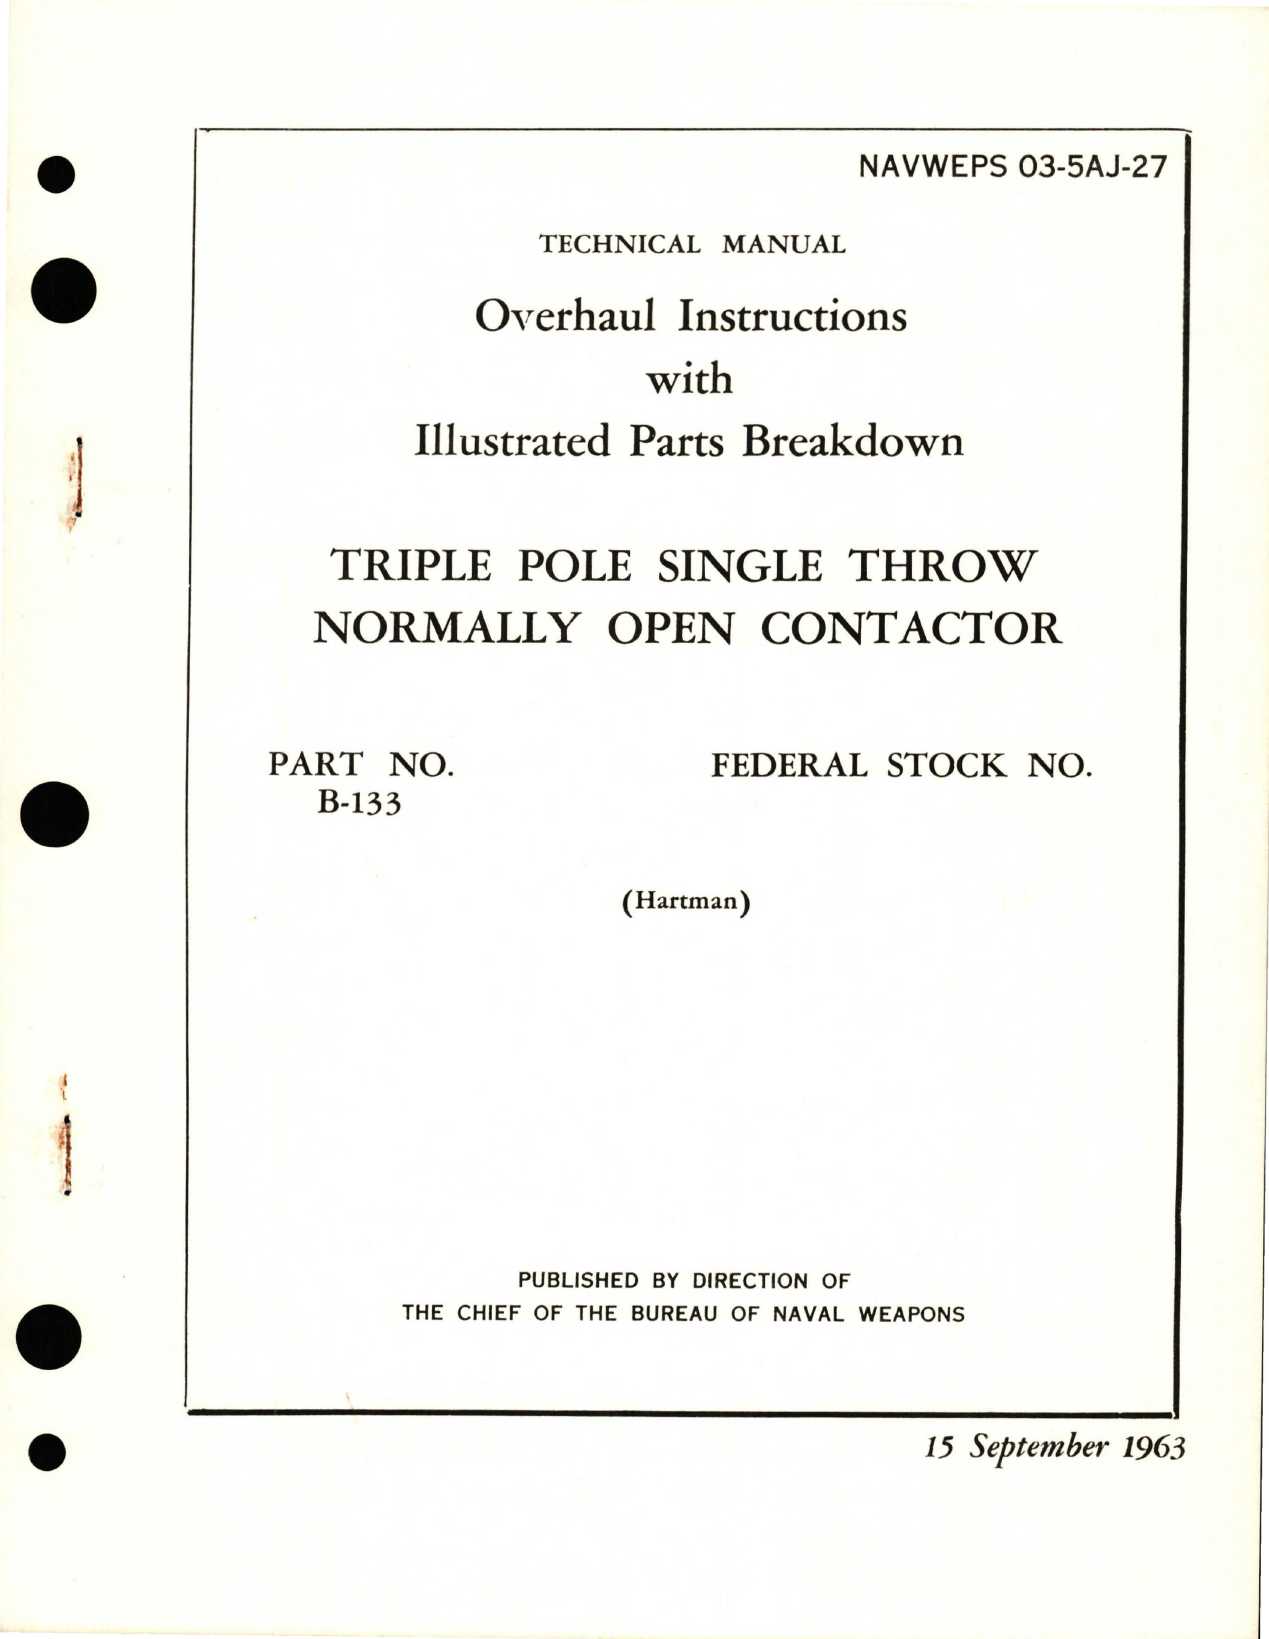 Sample page 1 from AirCorps Library document: Overhaul Instructions with Illustrated Parts Breakdown for Triple Pole Single Throw Normally Open Contractor - Part B-133